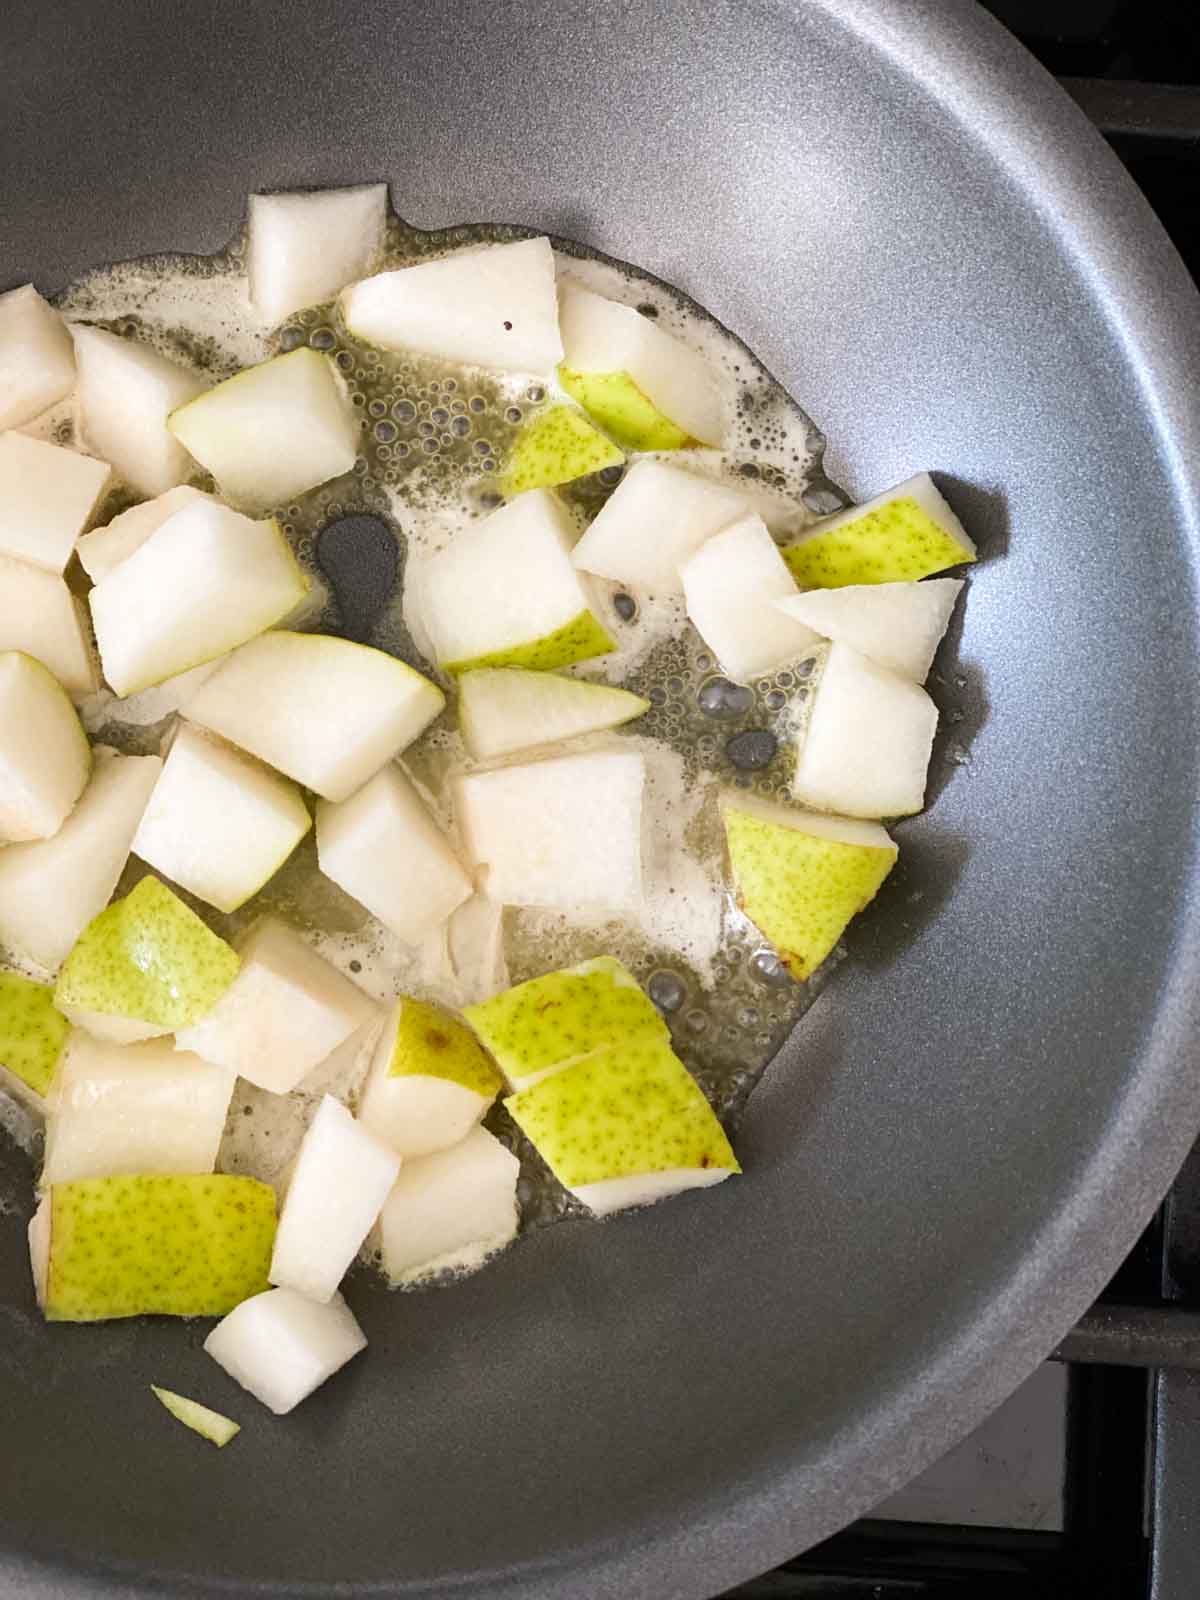 Adding chopped pears and butter or oil to a skillet to saute